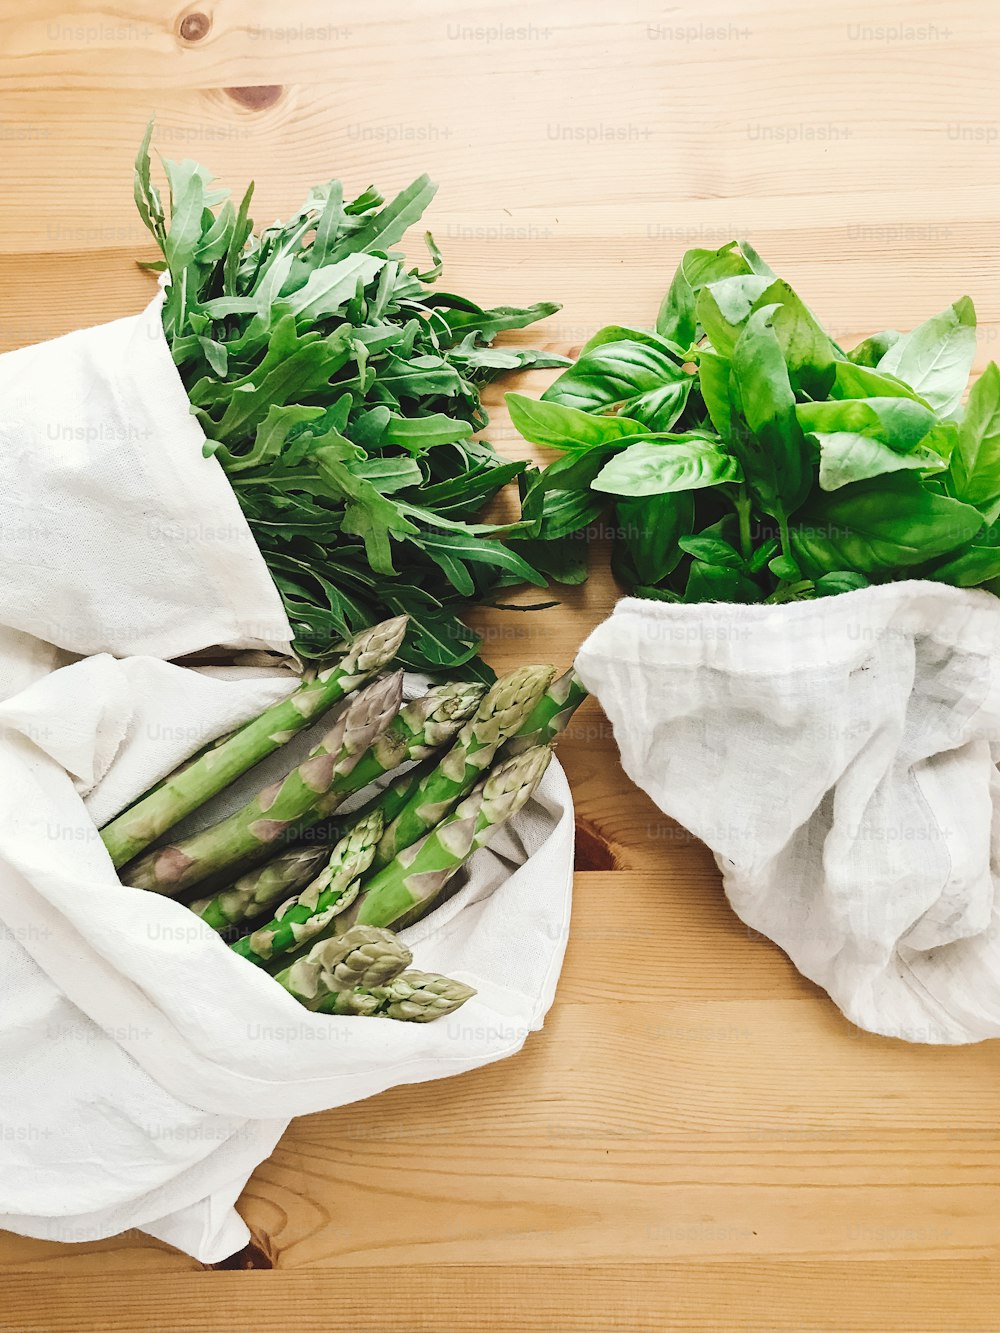 Zero waste grocery shopping concept. Reusable eco friendly bags with fresh asparagus, arugula,spinach,basil on wooden table, top view. Ban plastic. Choose plastic free.